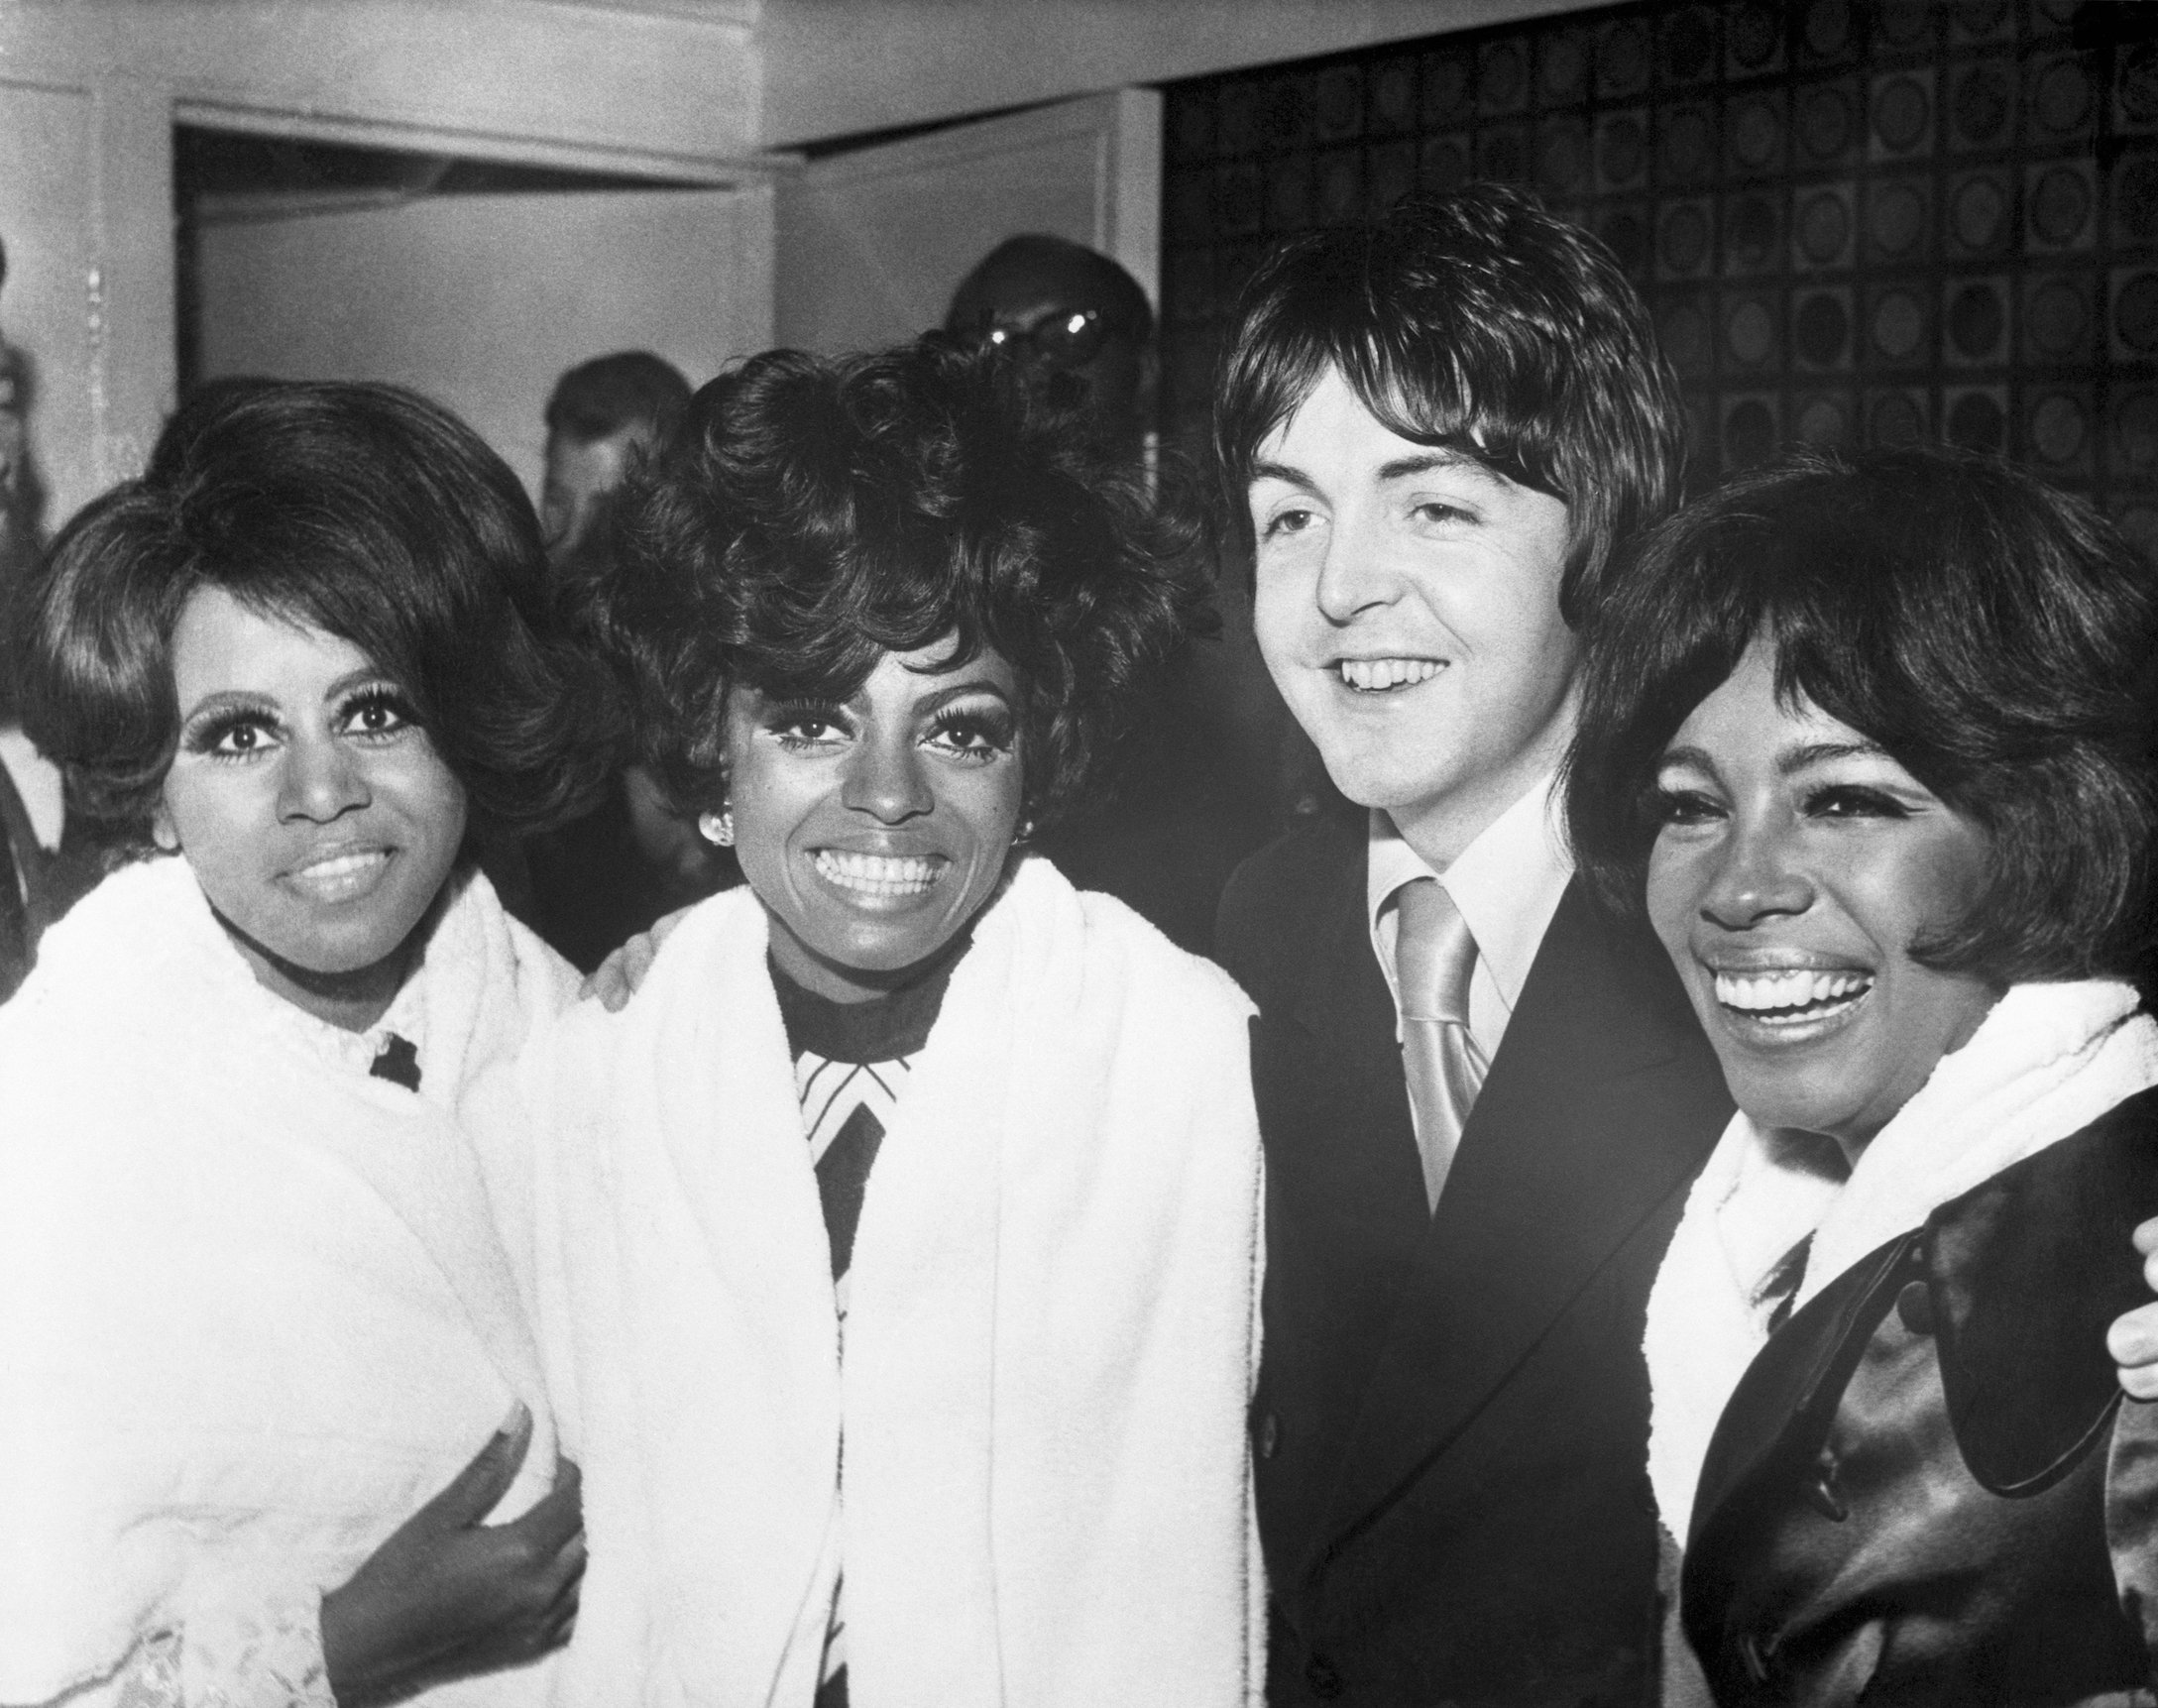 Paul McCartney of The Beatles poses with The Supremes at a party in London